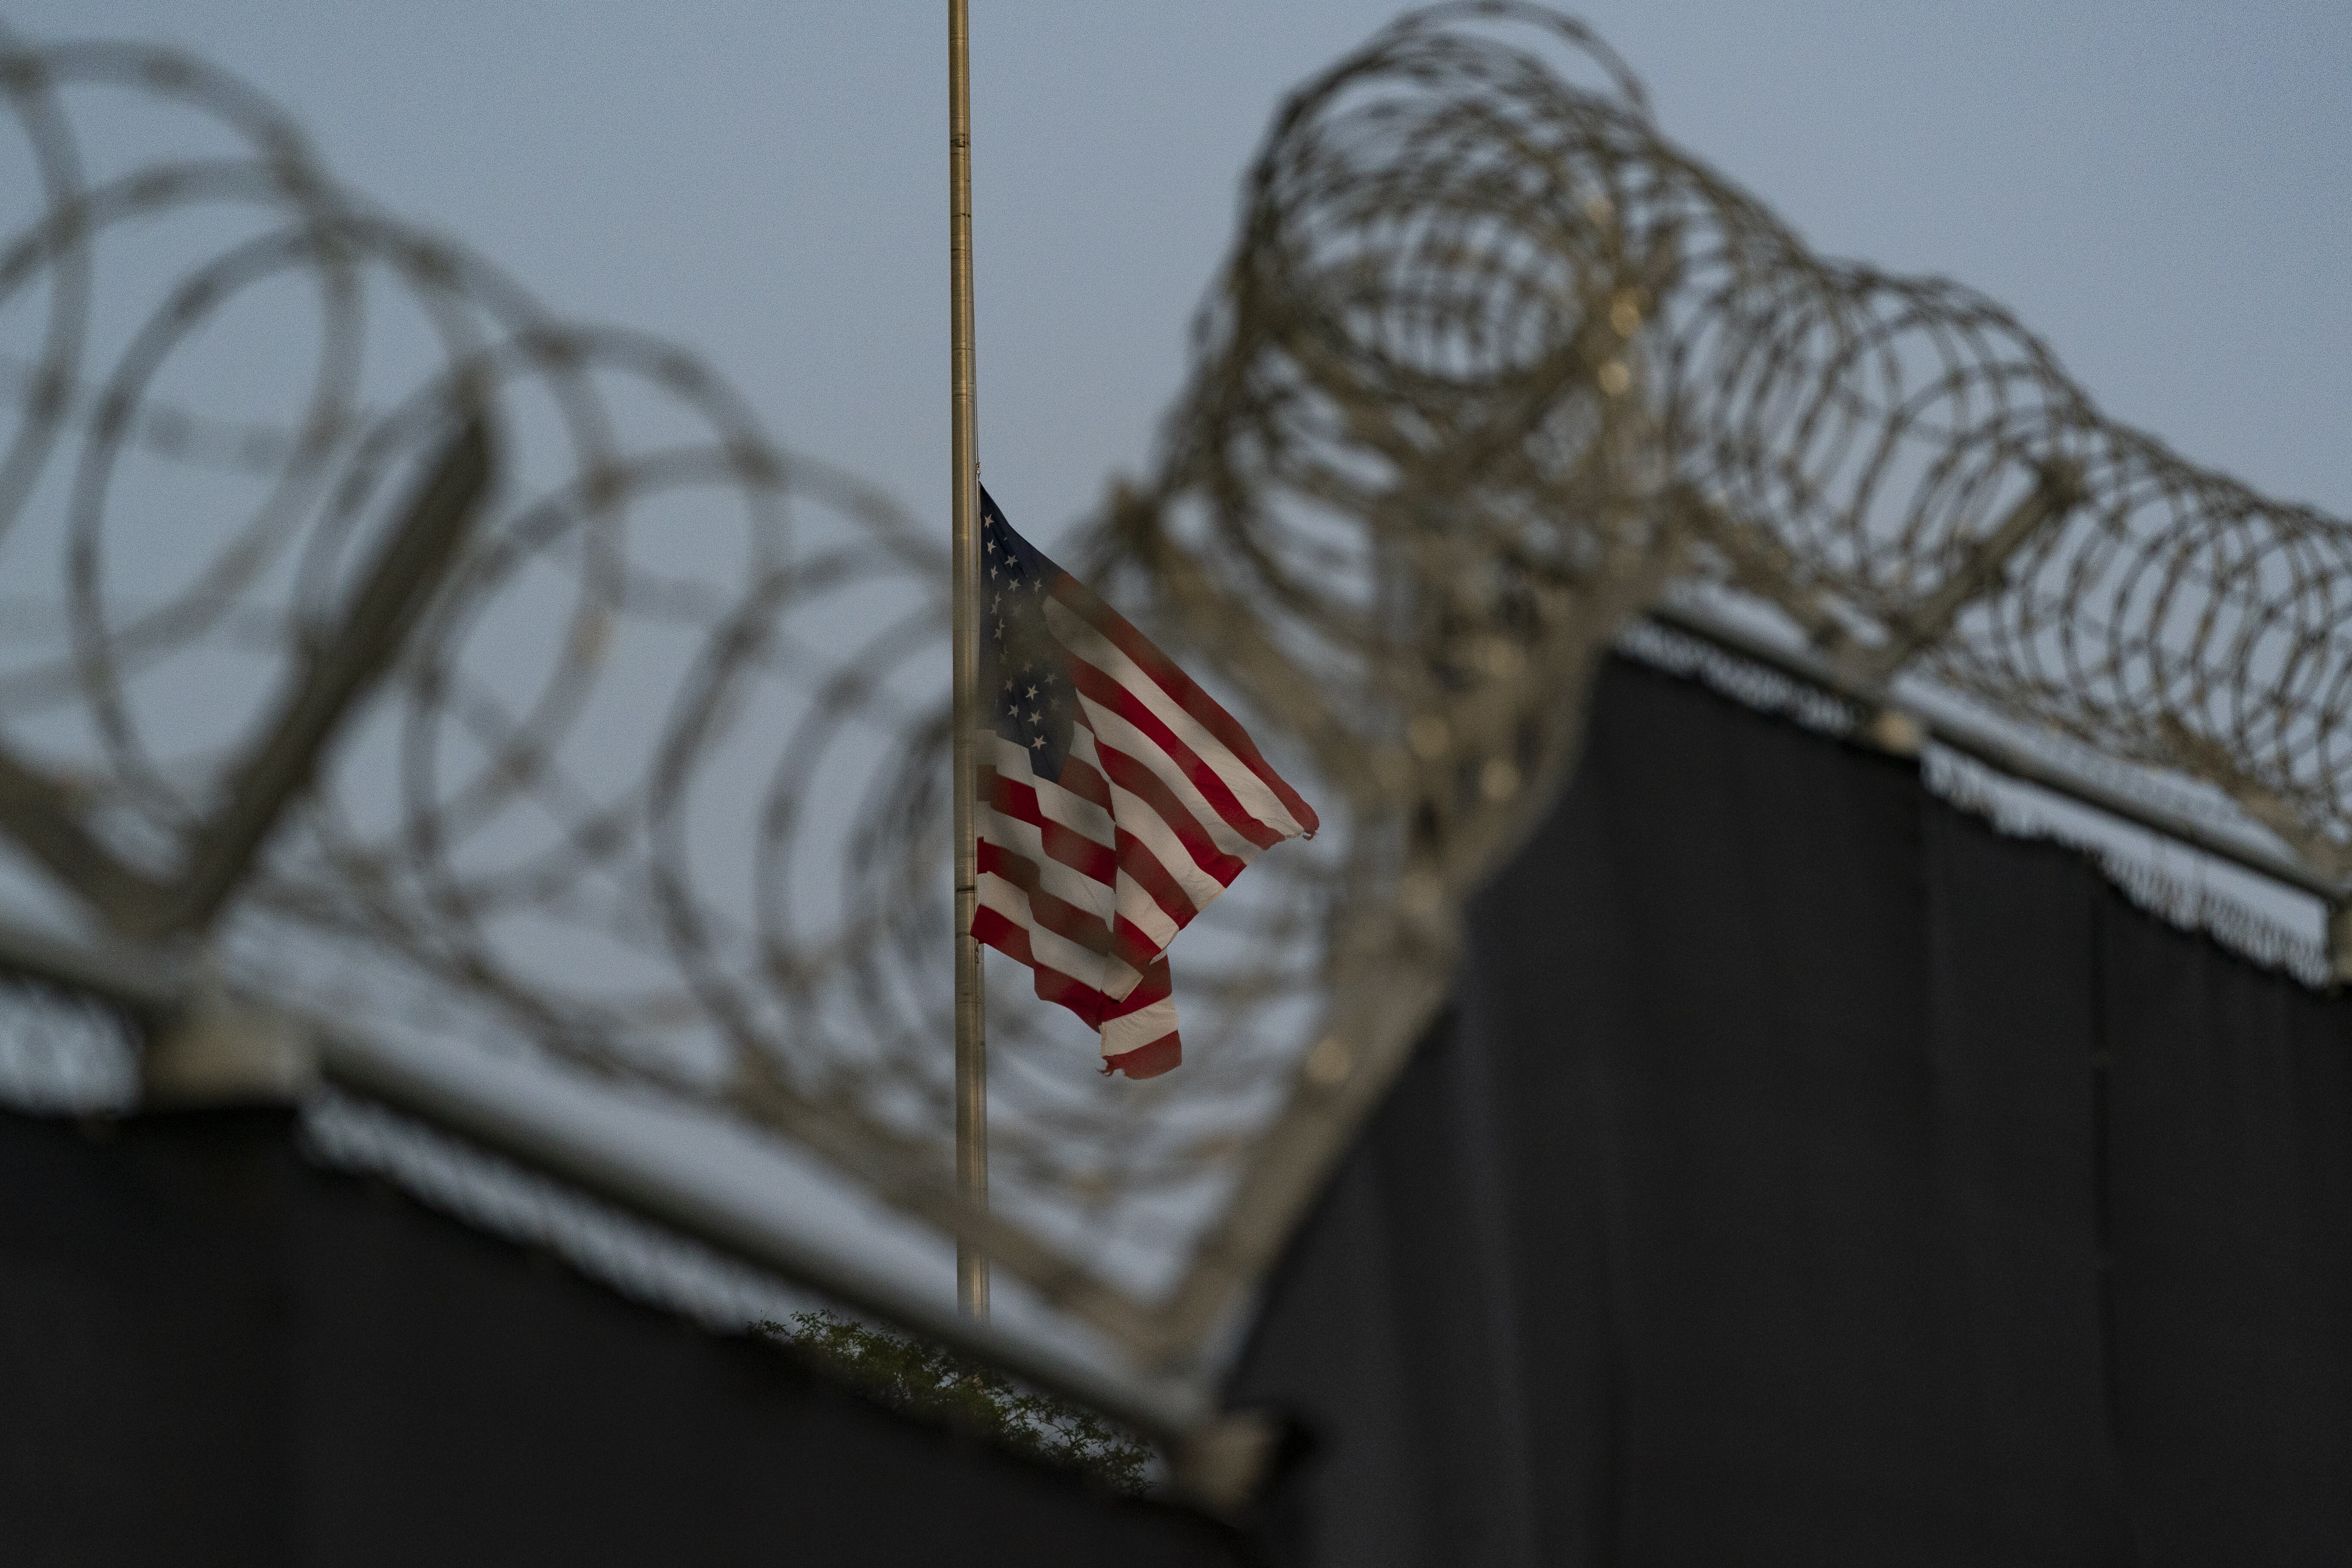 A US flag is seen flying at half-mast at the Guantanamo Bay Naval Base in Cuba, where the military commission proceedings are held for detainees charged with war crimes. Photo: AP